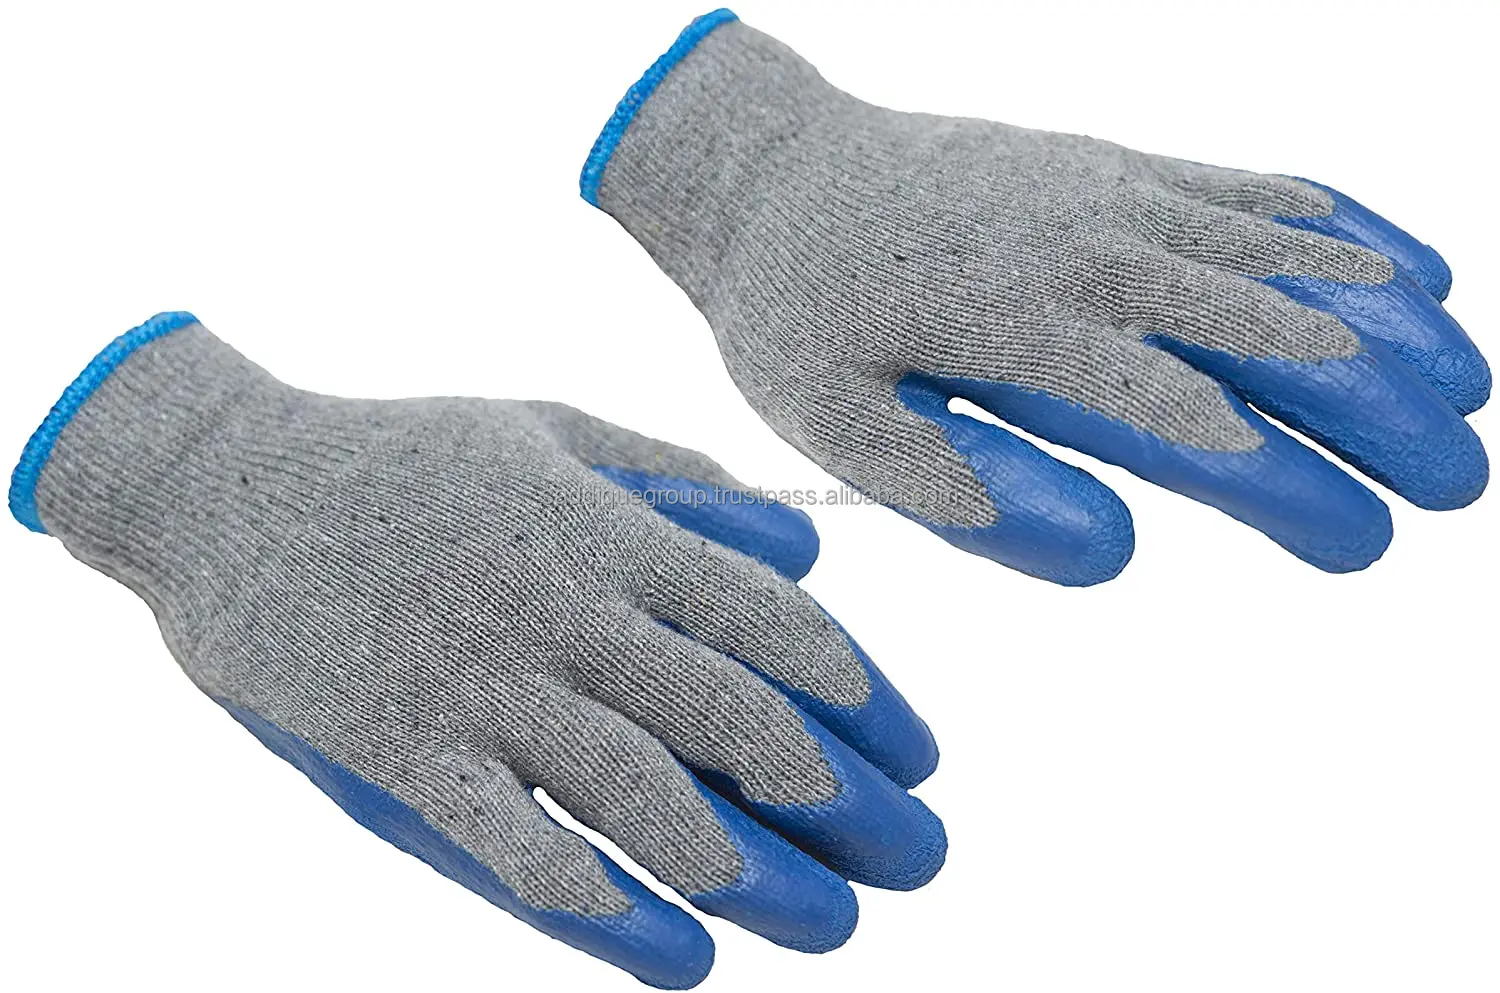 Details about    Heavy Duty Rubber Latex Coated Work Gloves for Construction Blue Pack of 5 